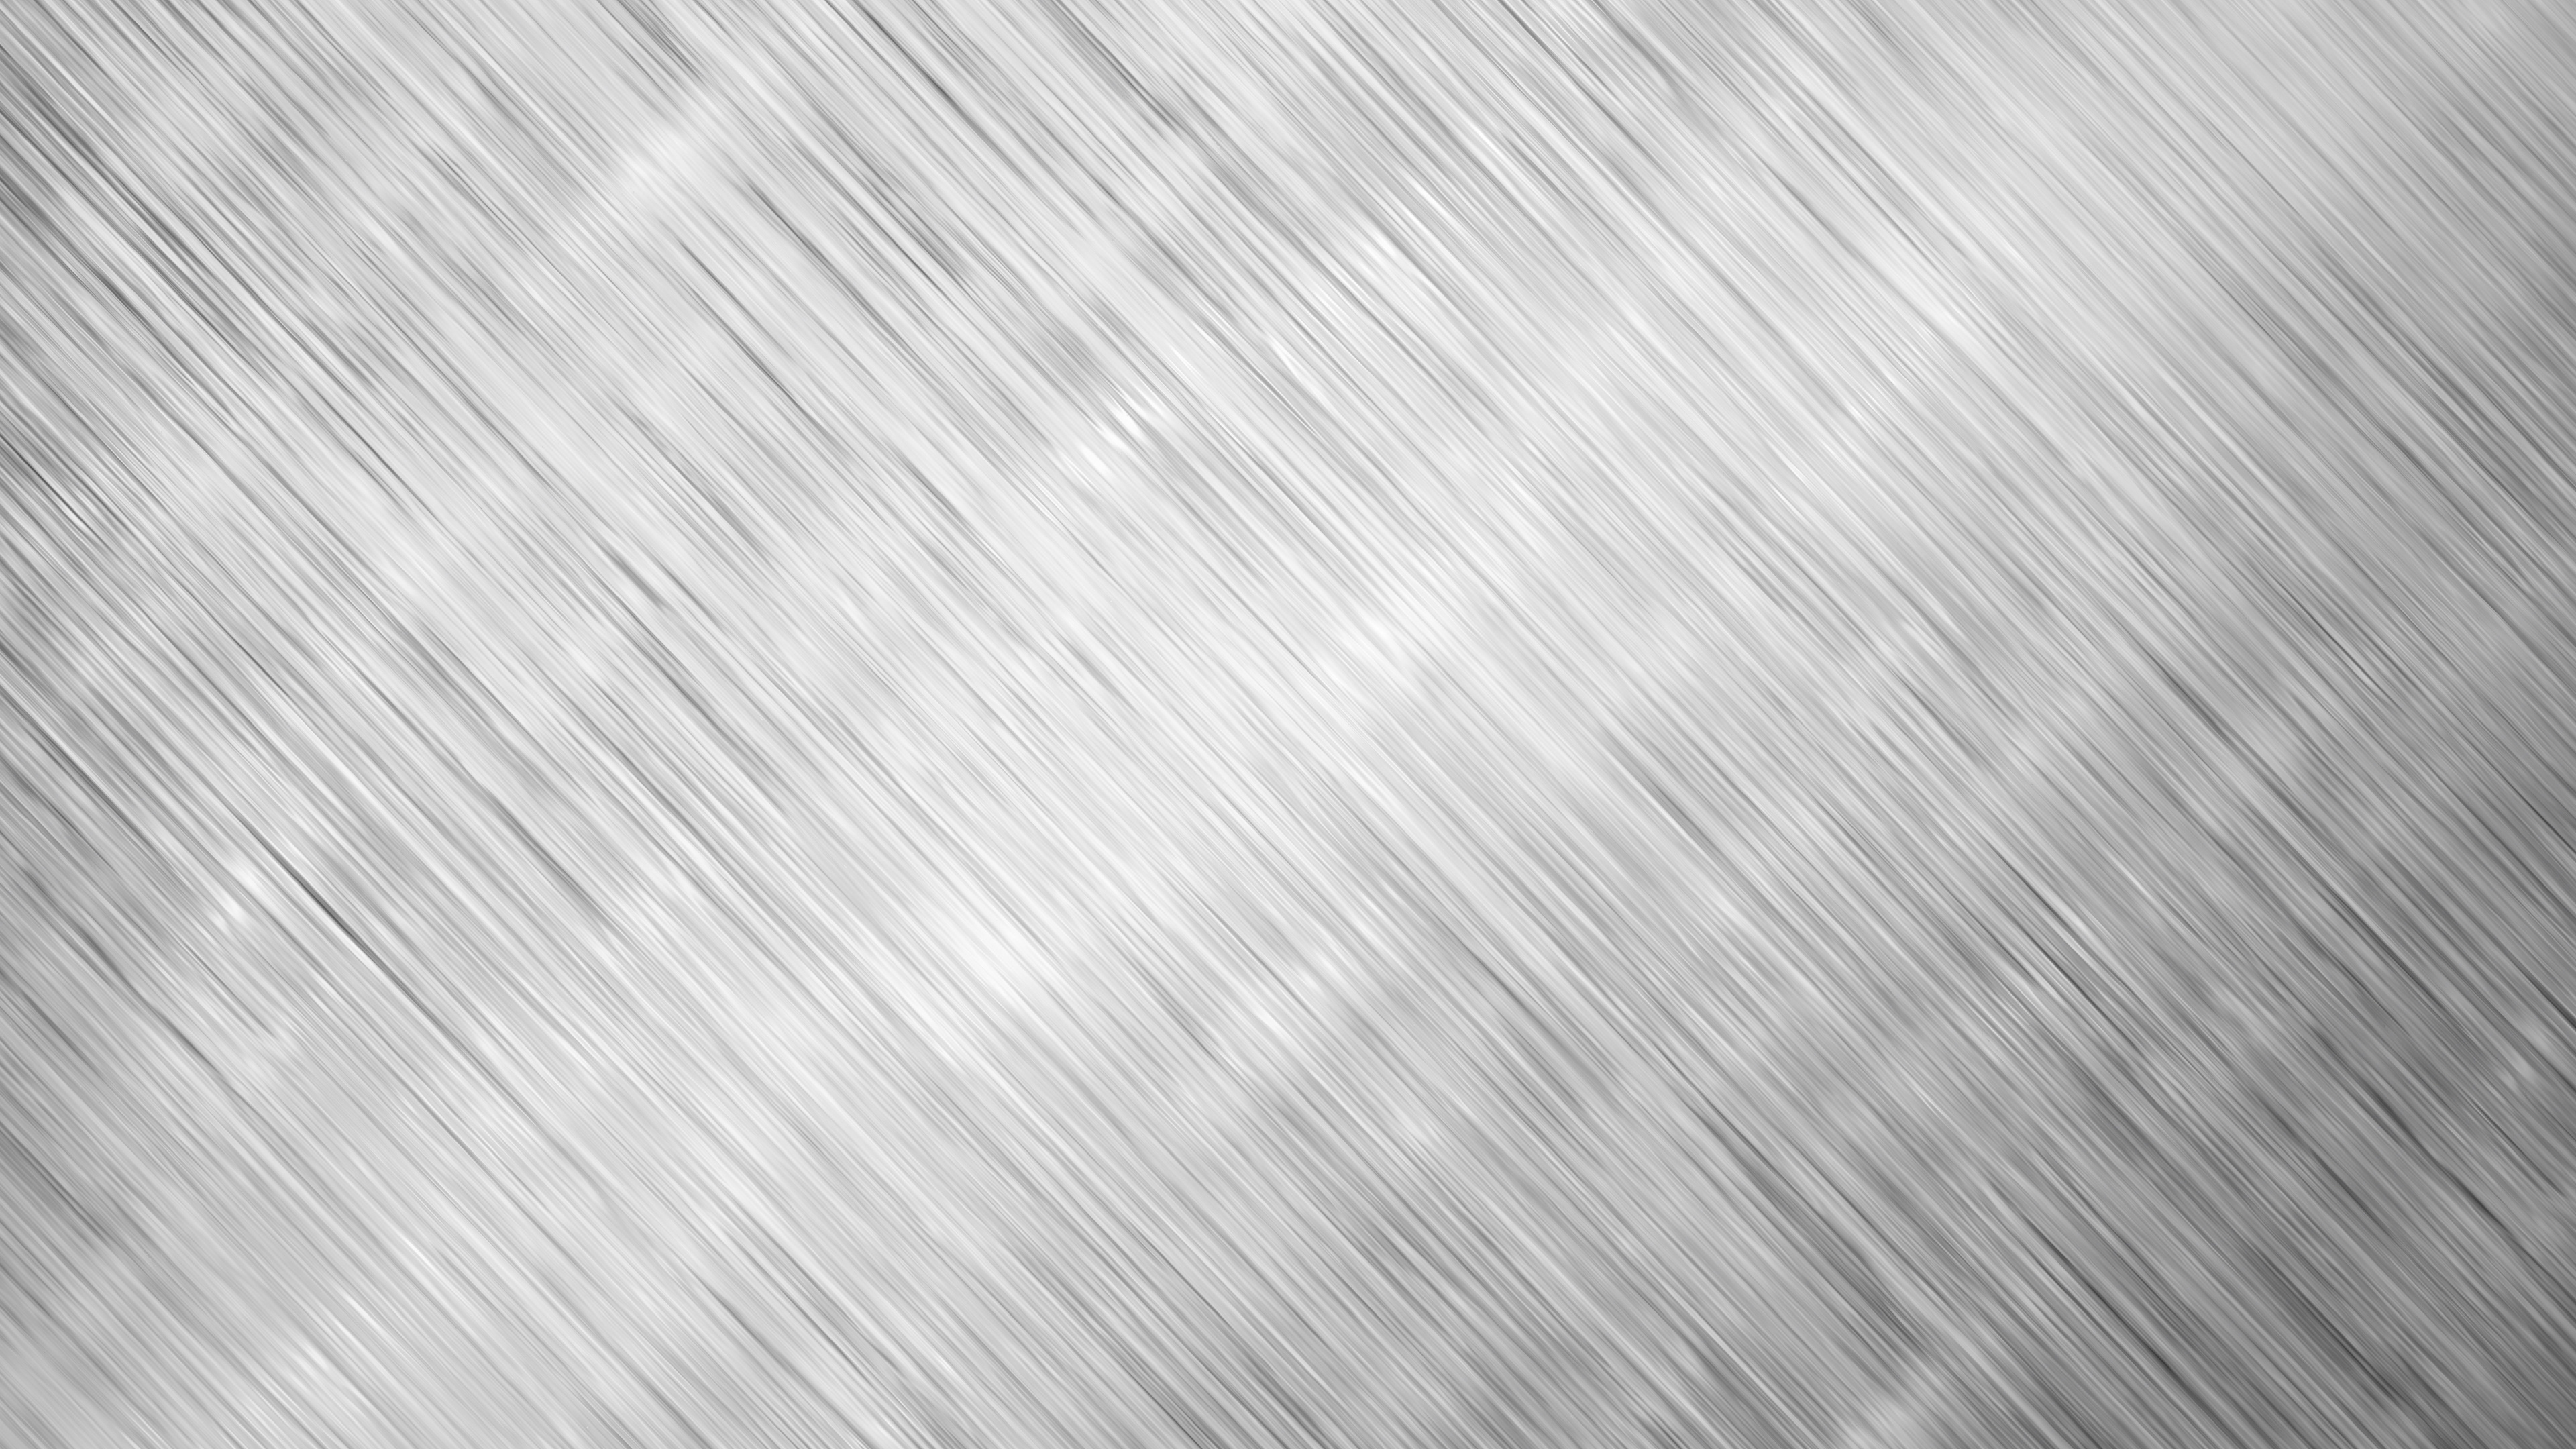 Grey and White Striped Textile. Wallpaper in 3840x2160 Resolution